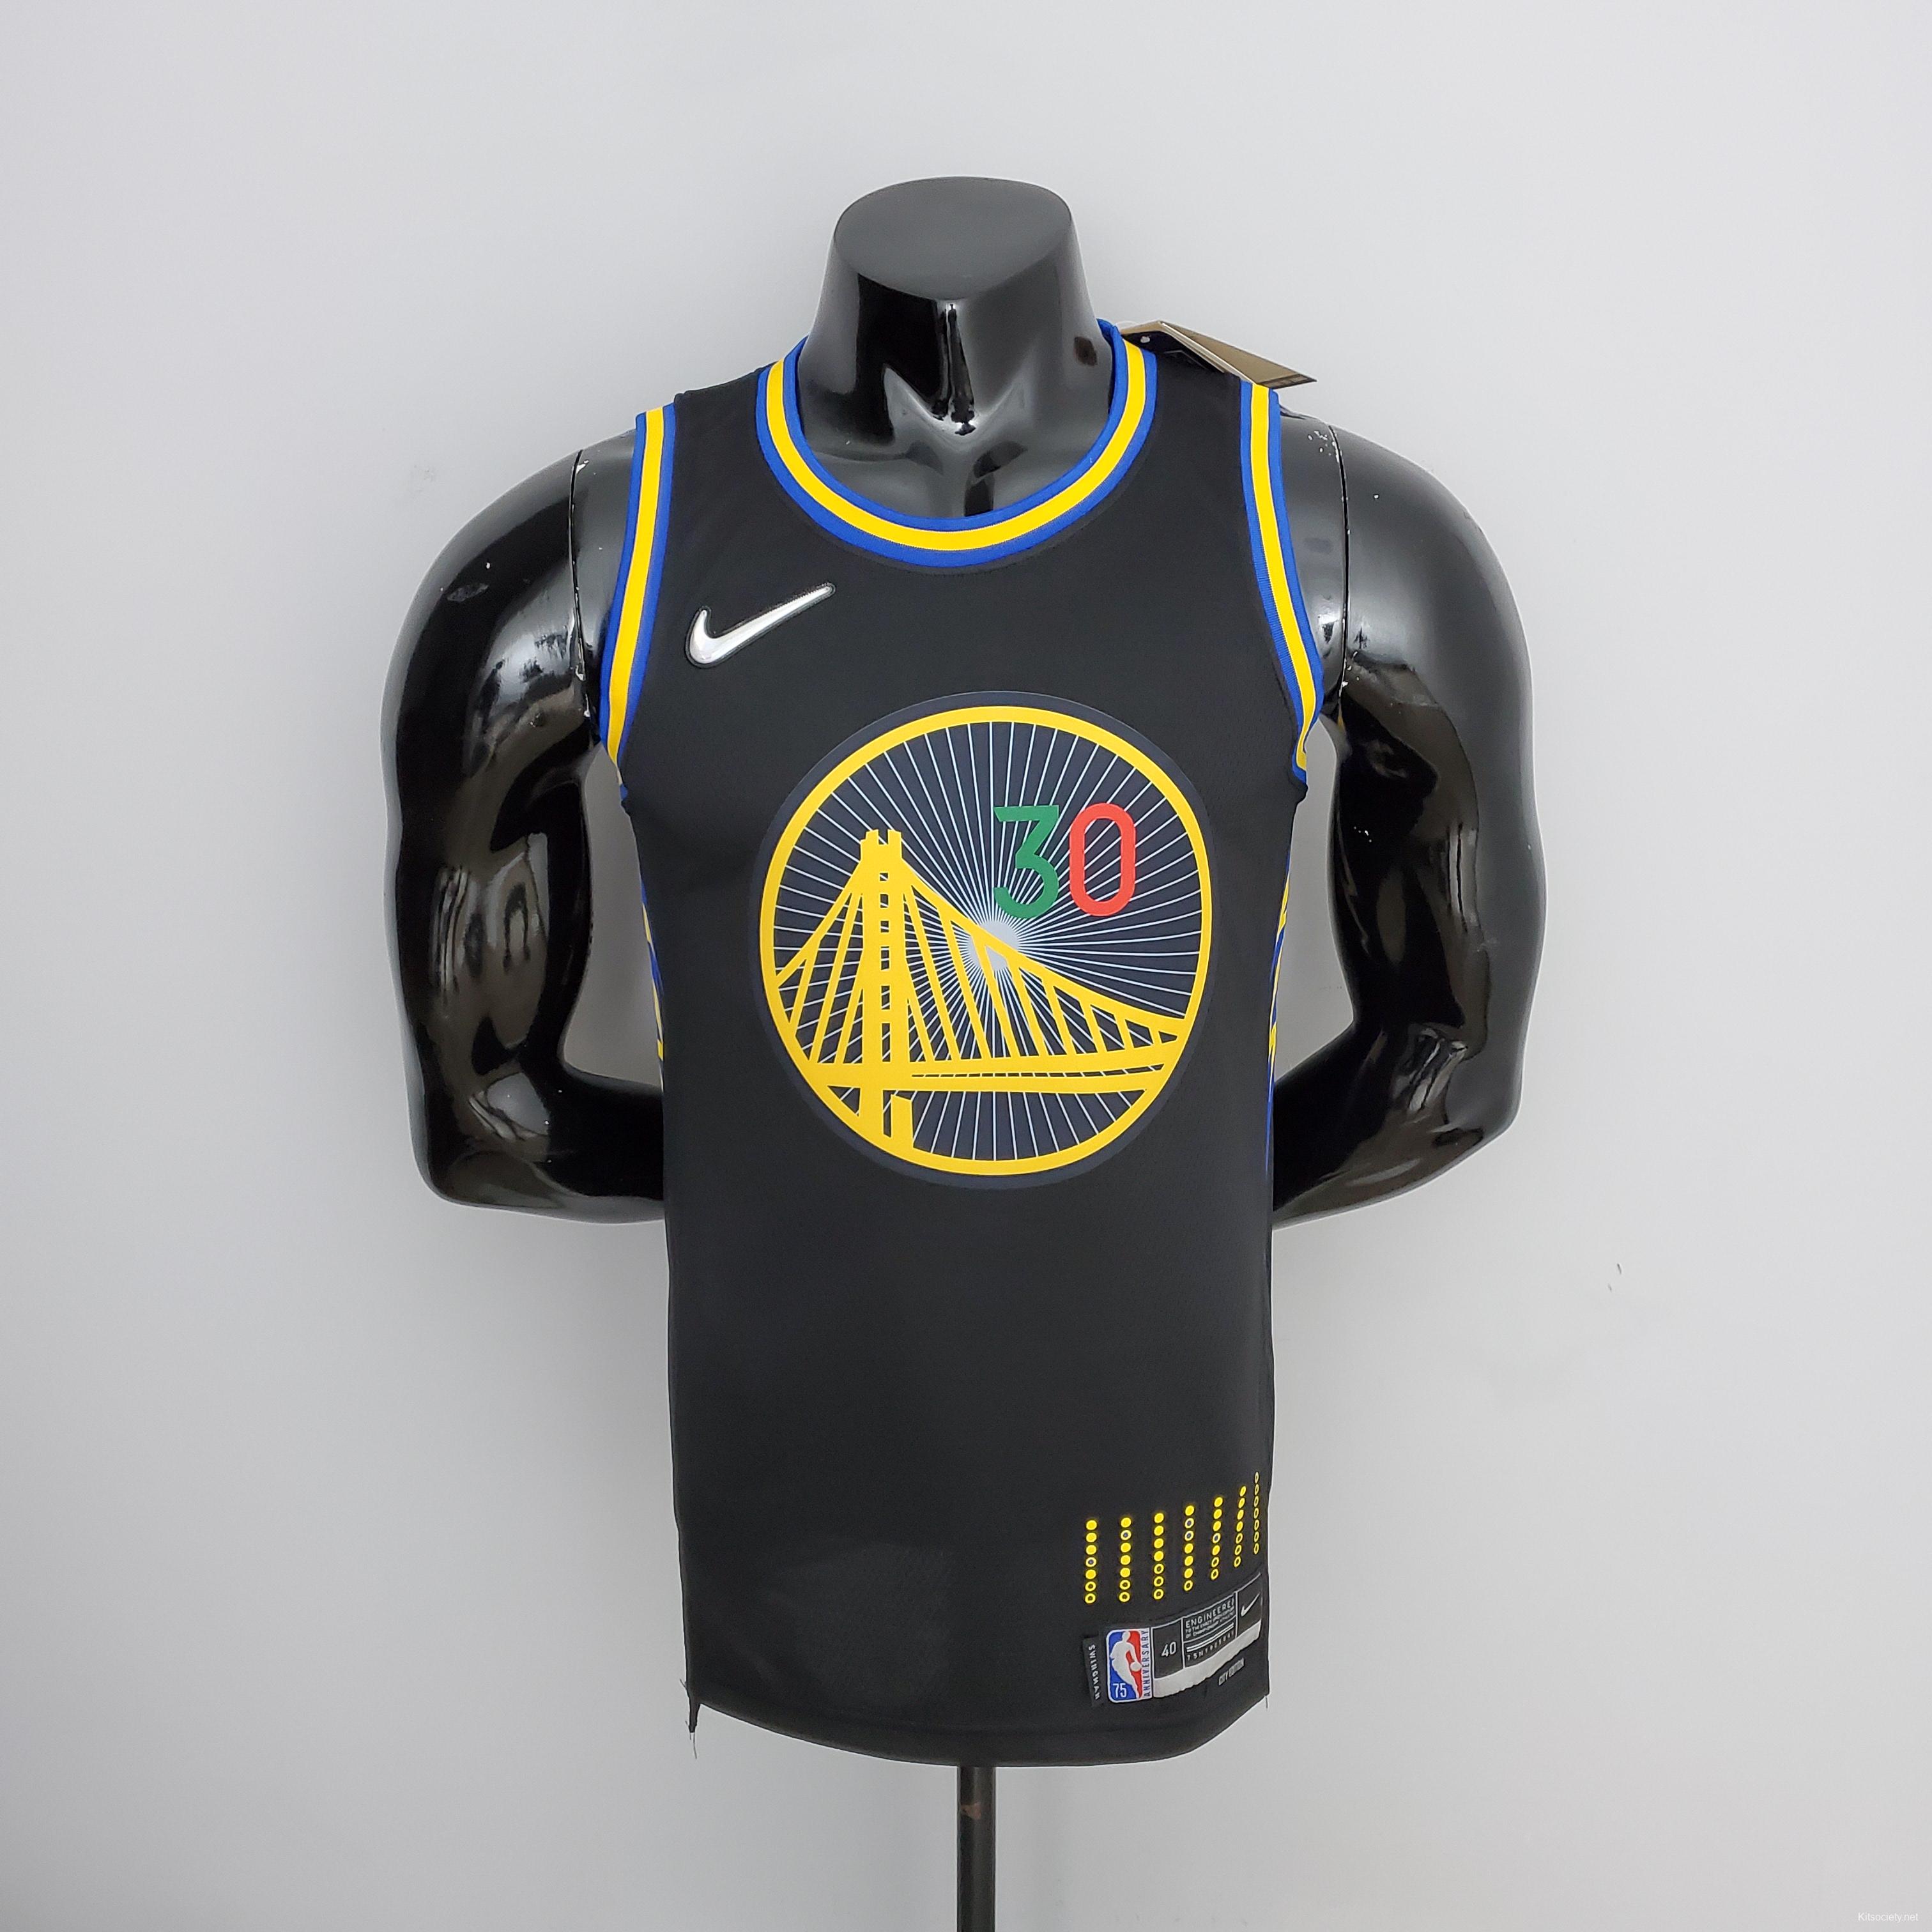 2022 75th Anniversary Golden State Warriors Curry #30 Mexico Edition Black NBA  Jersey - Kitsociety